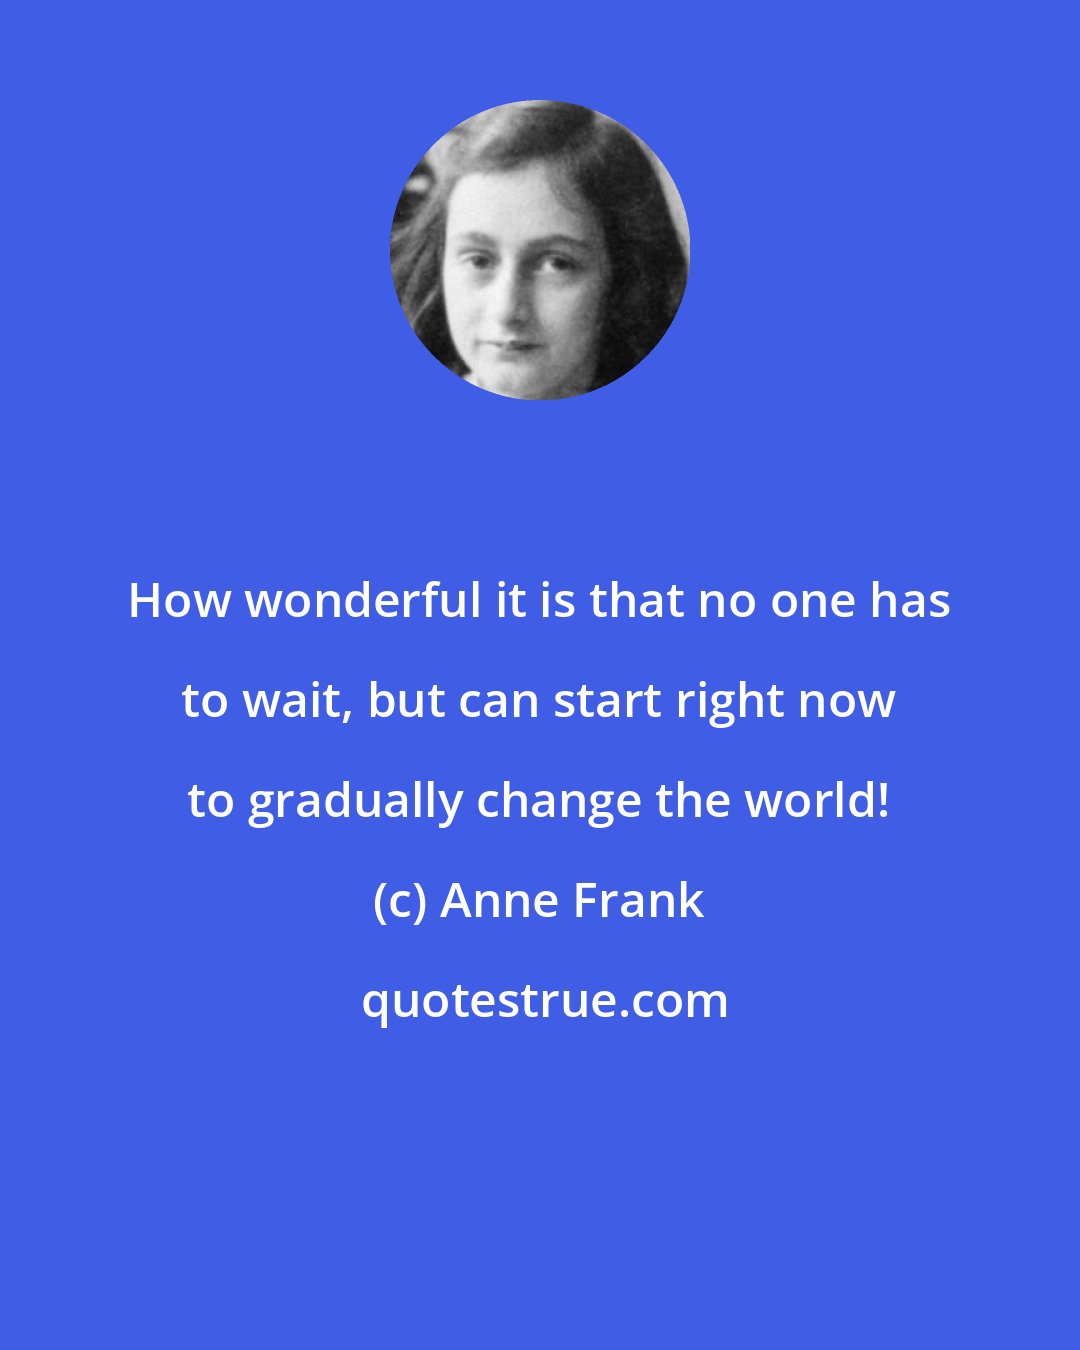 Anne Frank: How wonderful it is that no one has to wait, but can start right now to gradually change the world!